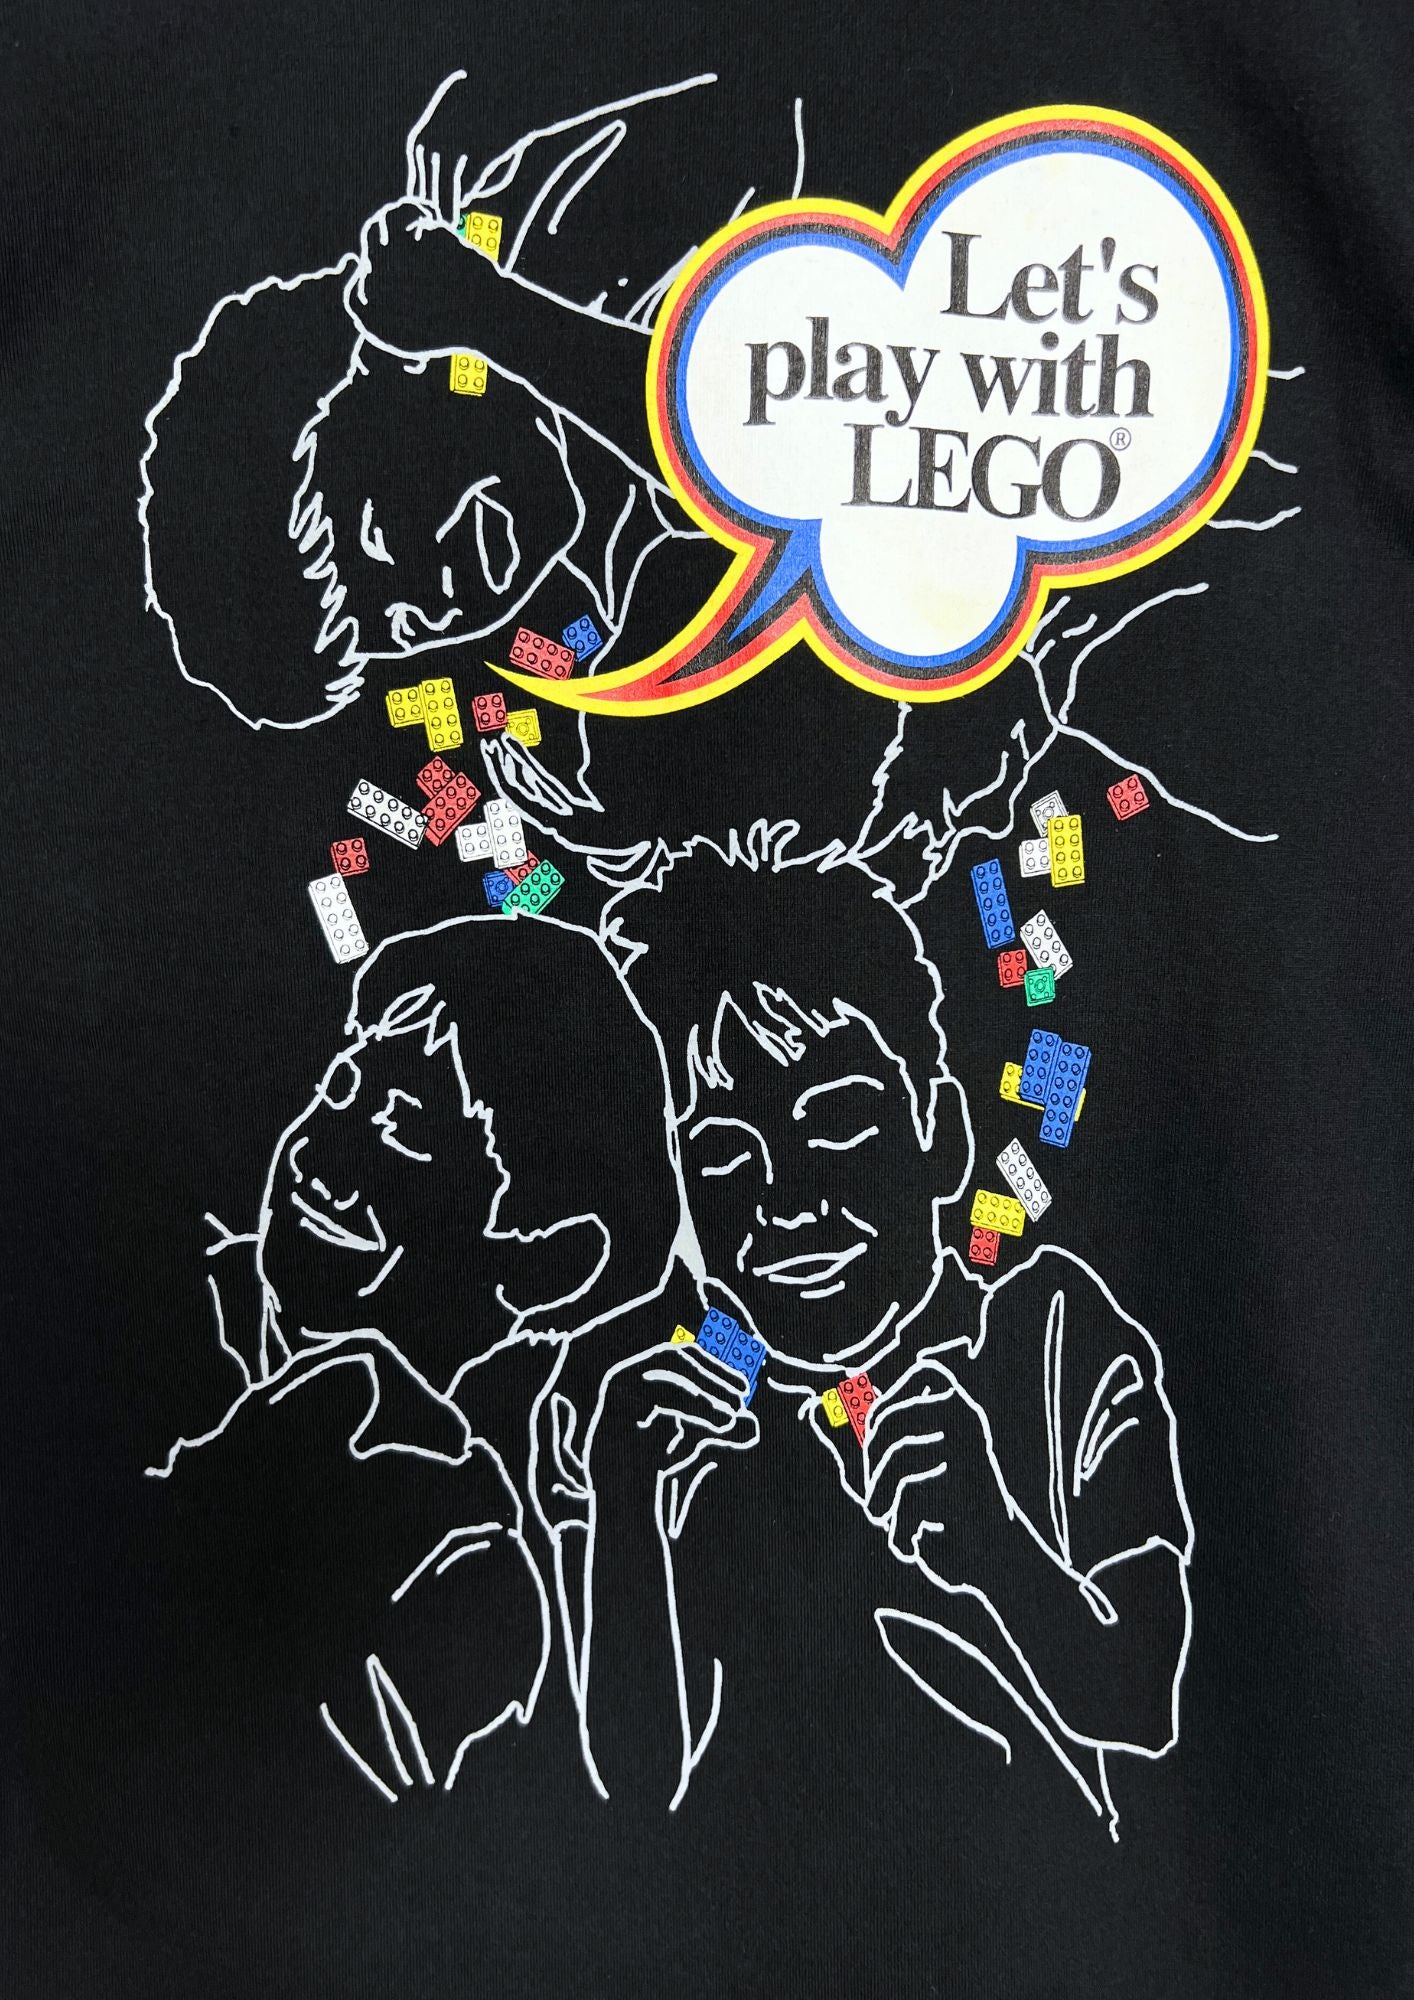 2002 Taiyo Matsumoto x LEGO Let's play with LEGO T-shirt